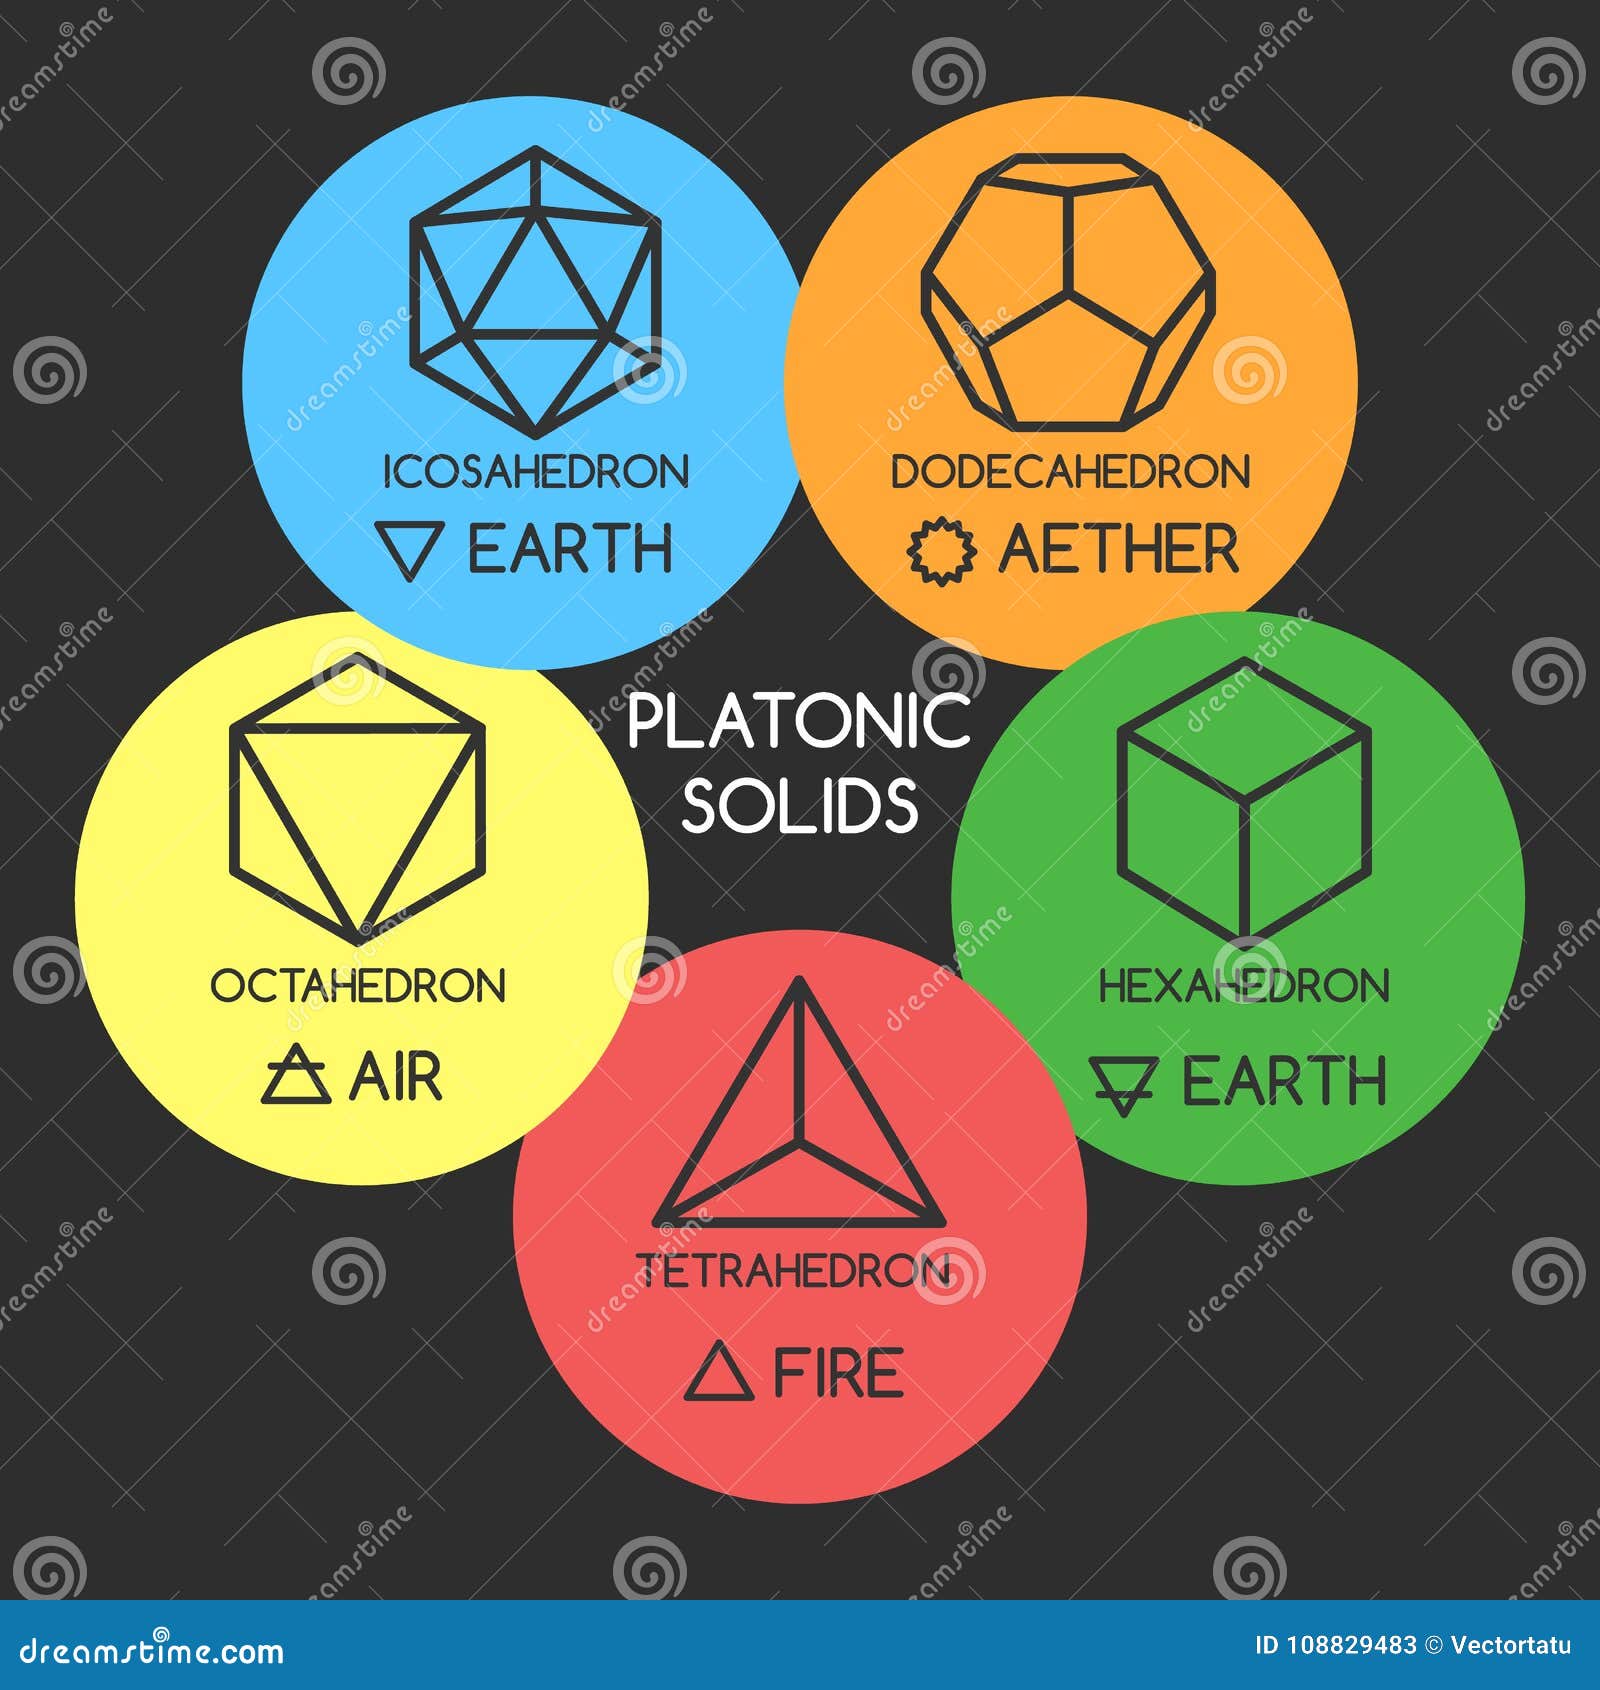 3D platonic forms stock vector. Illustration of hexahedron - 108829483